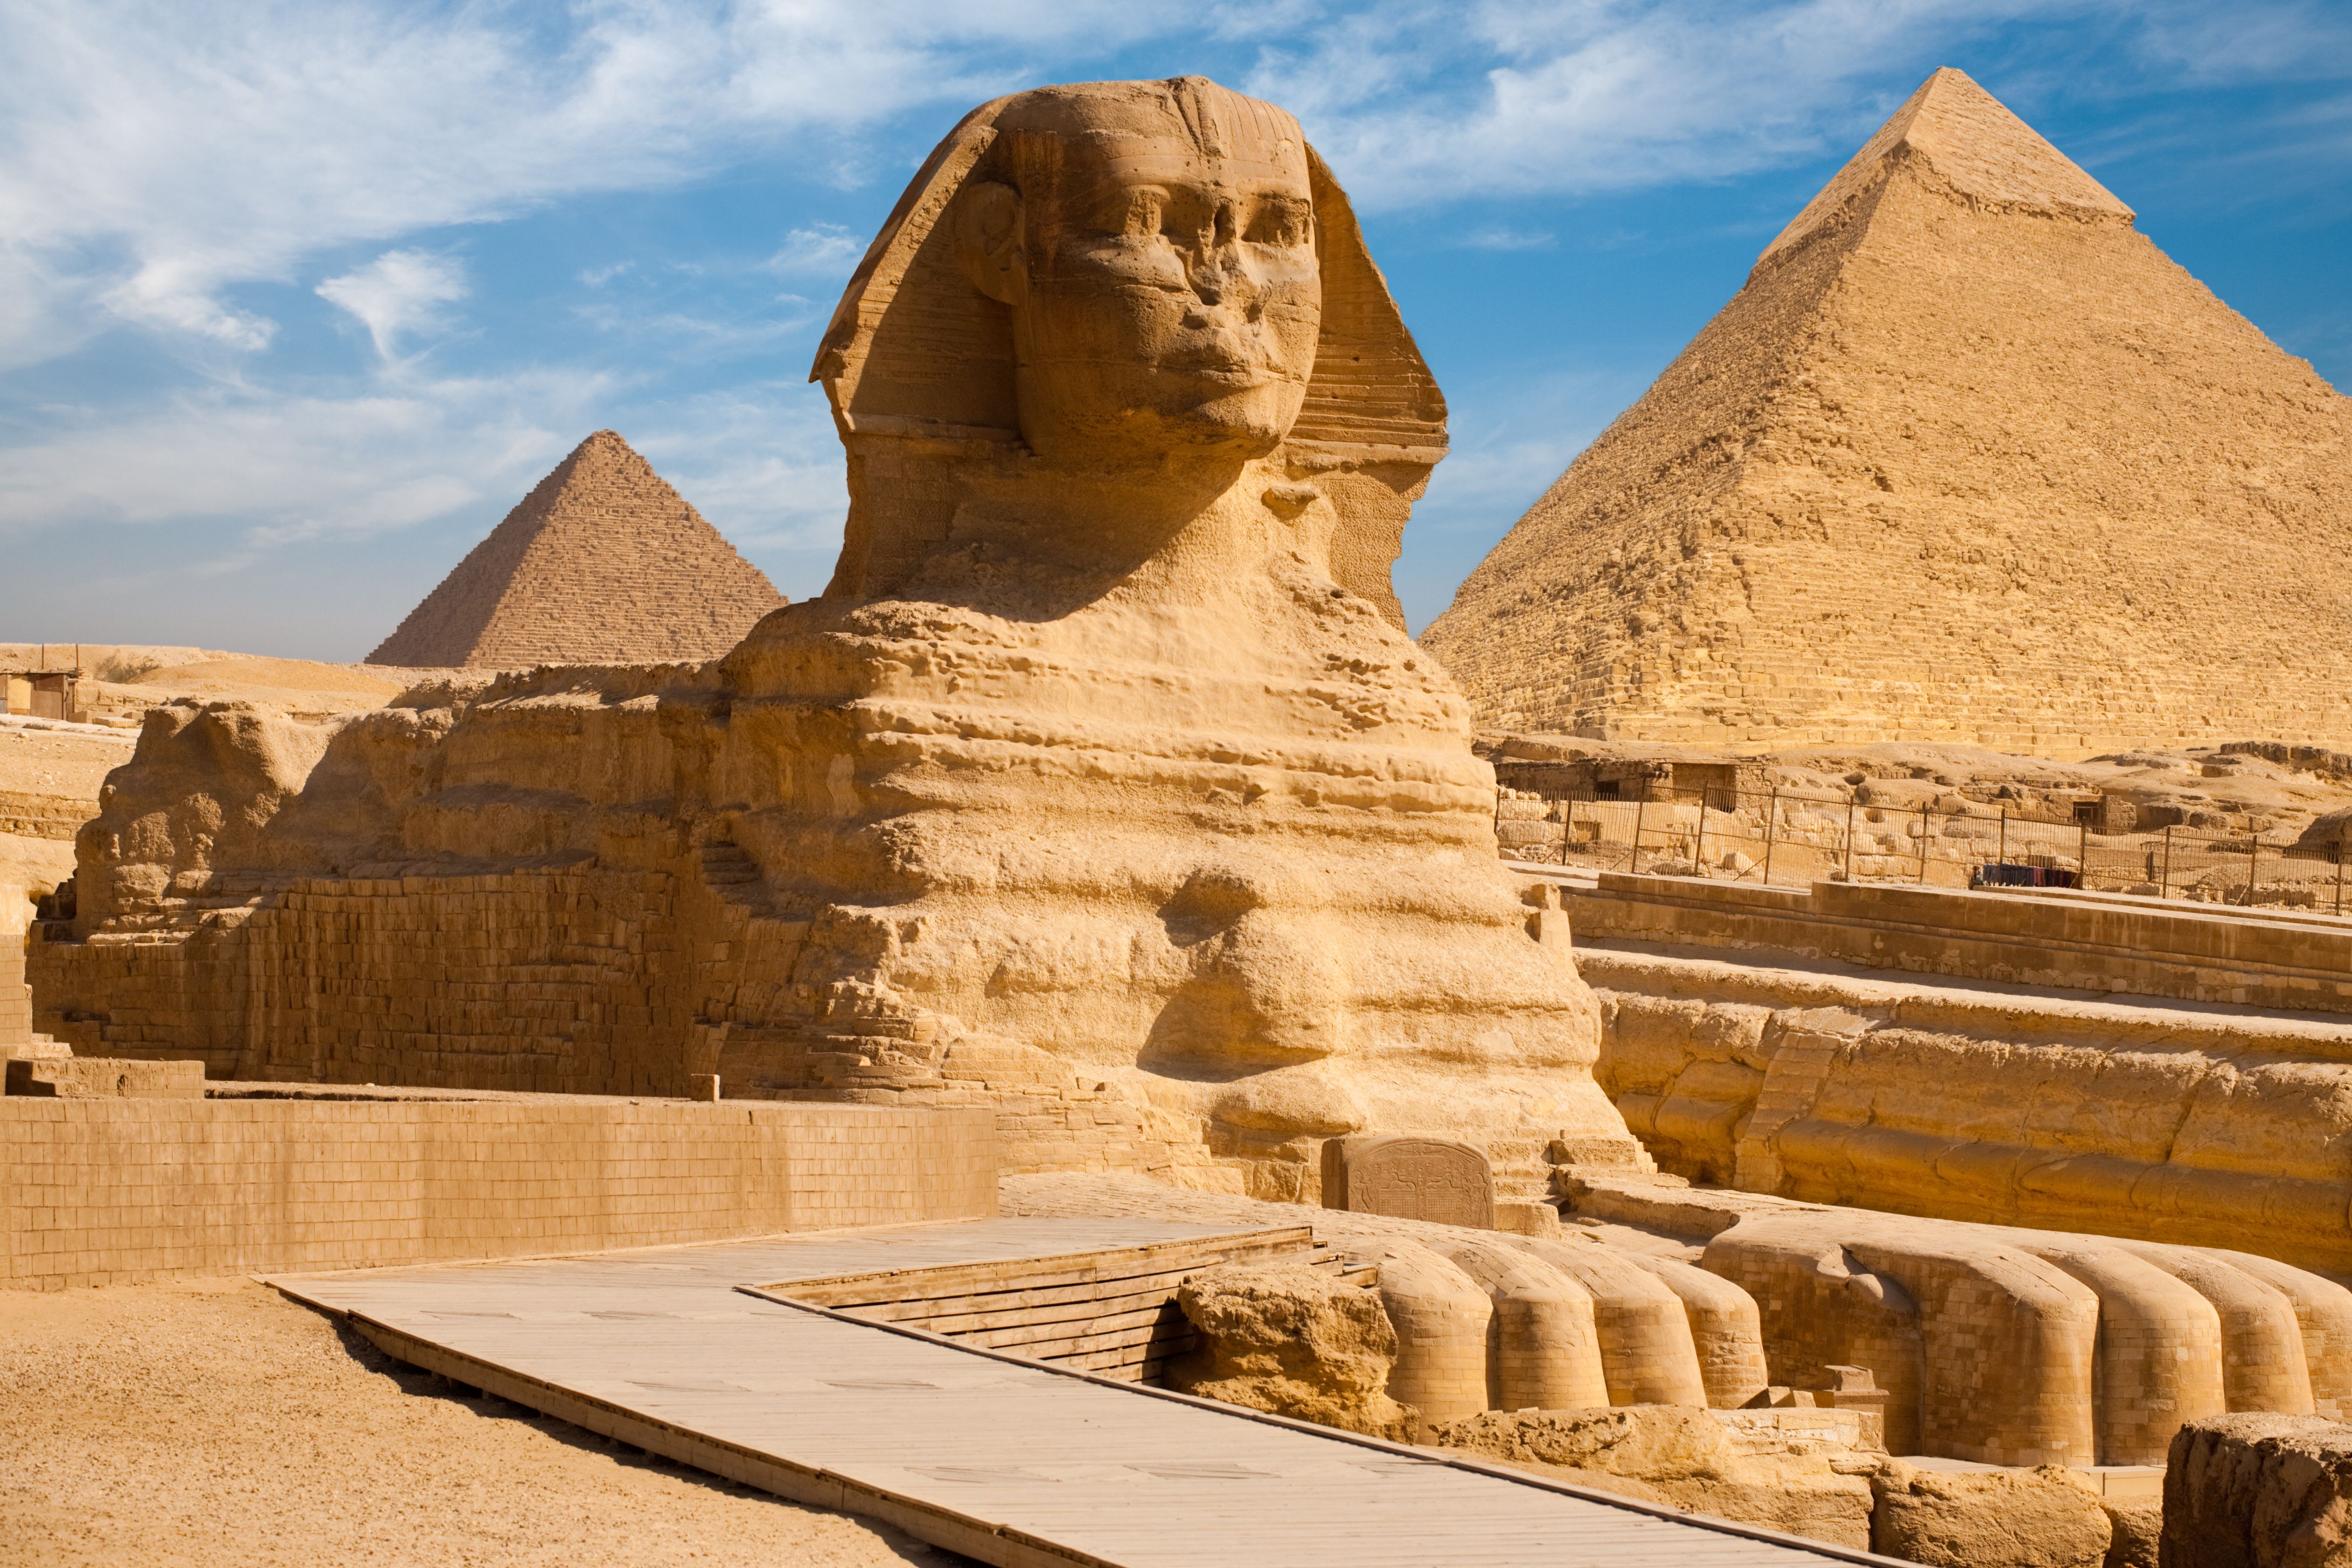 The Great Sphinx and the Pyramids